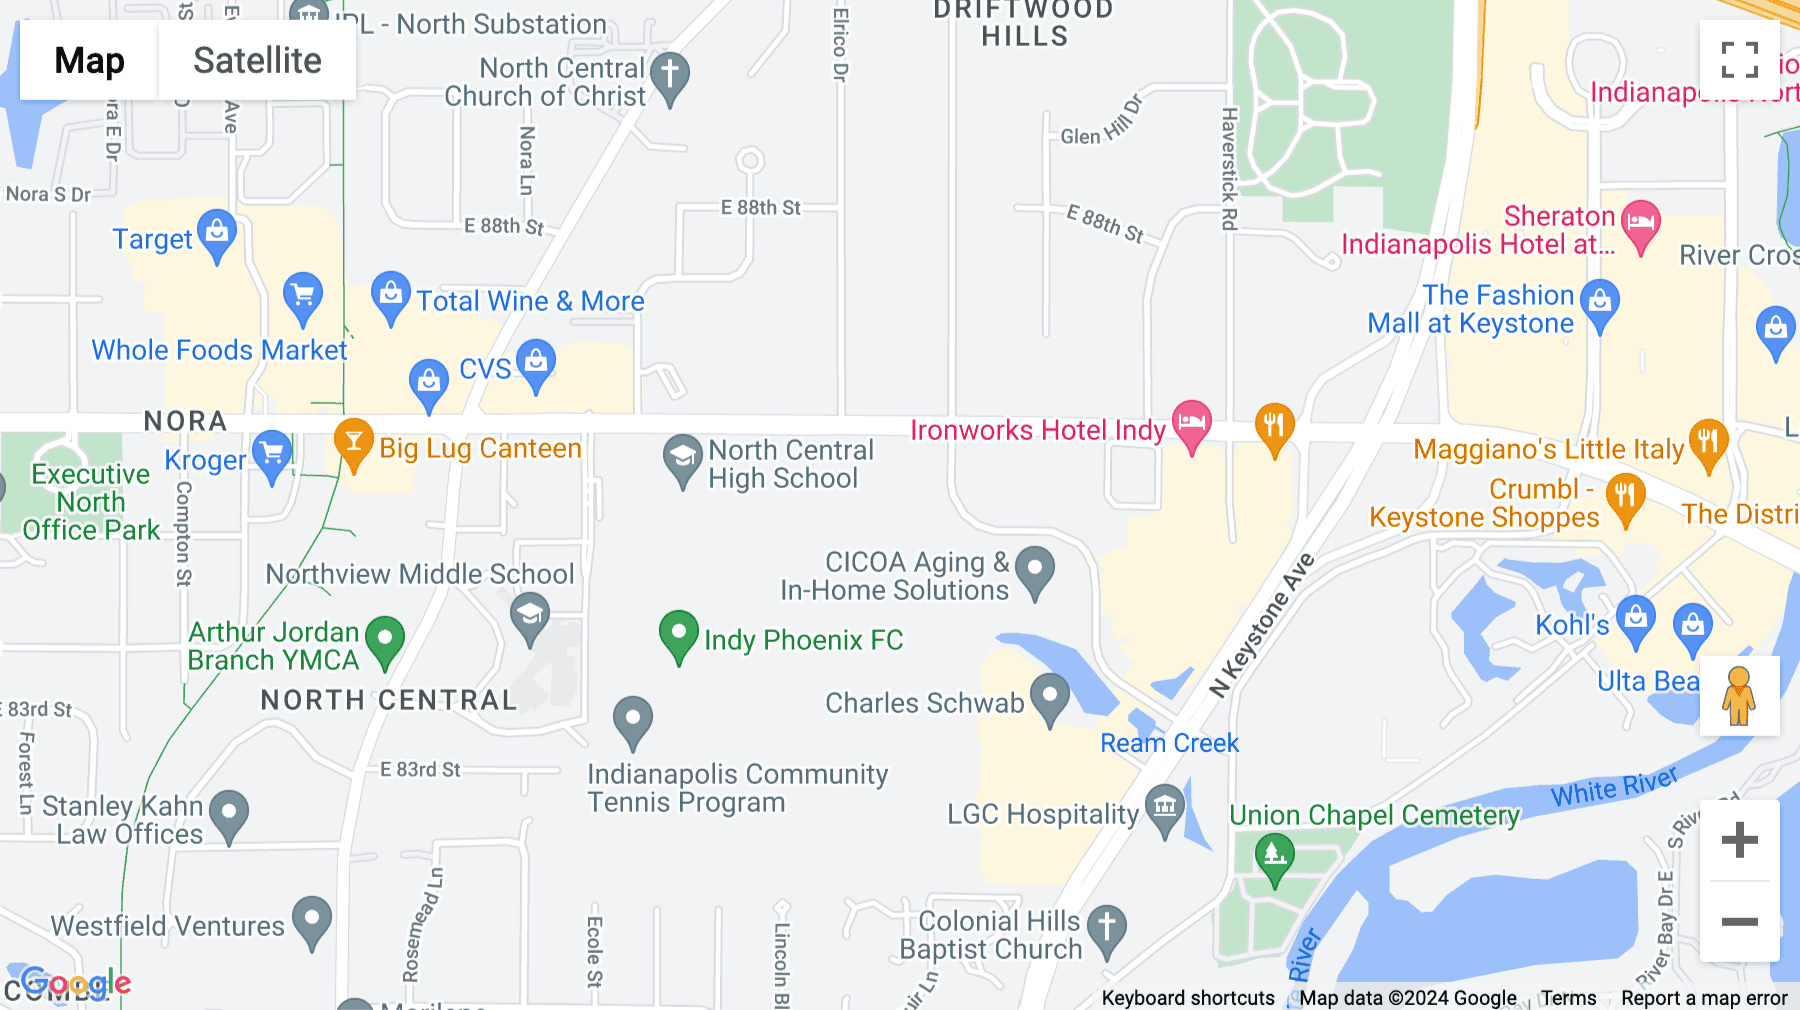 Click for interative map of 8888 Keystone Crossing, Keystone Crossing Center, Indianapolis, Indiana, Indianapolis